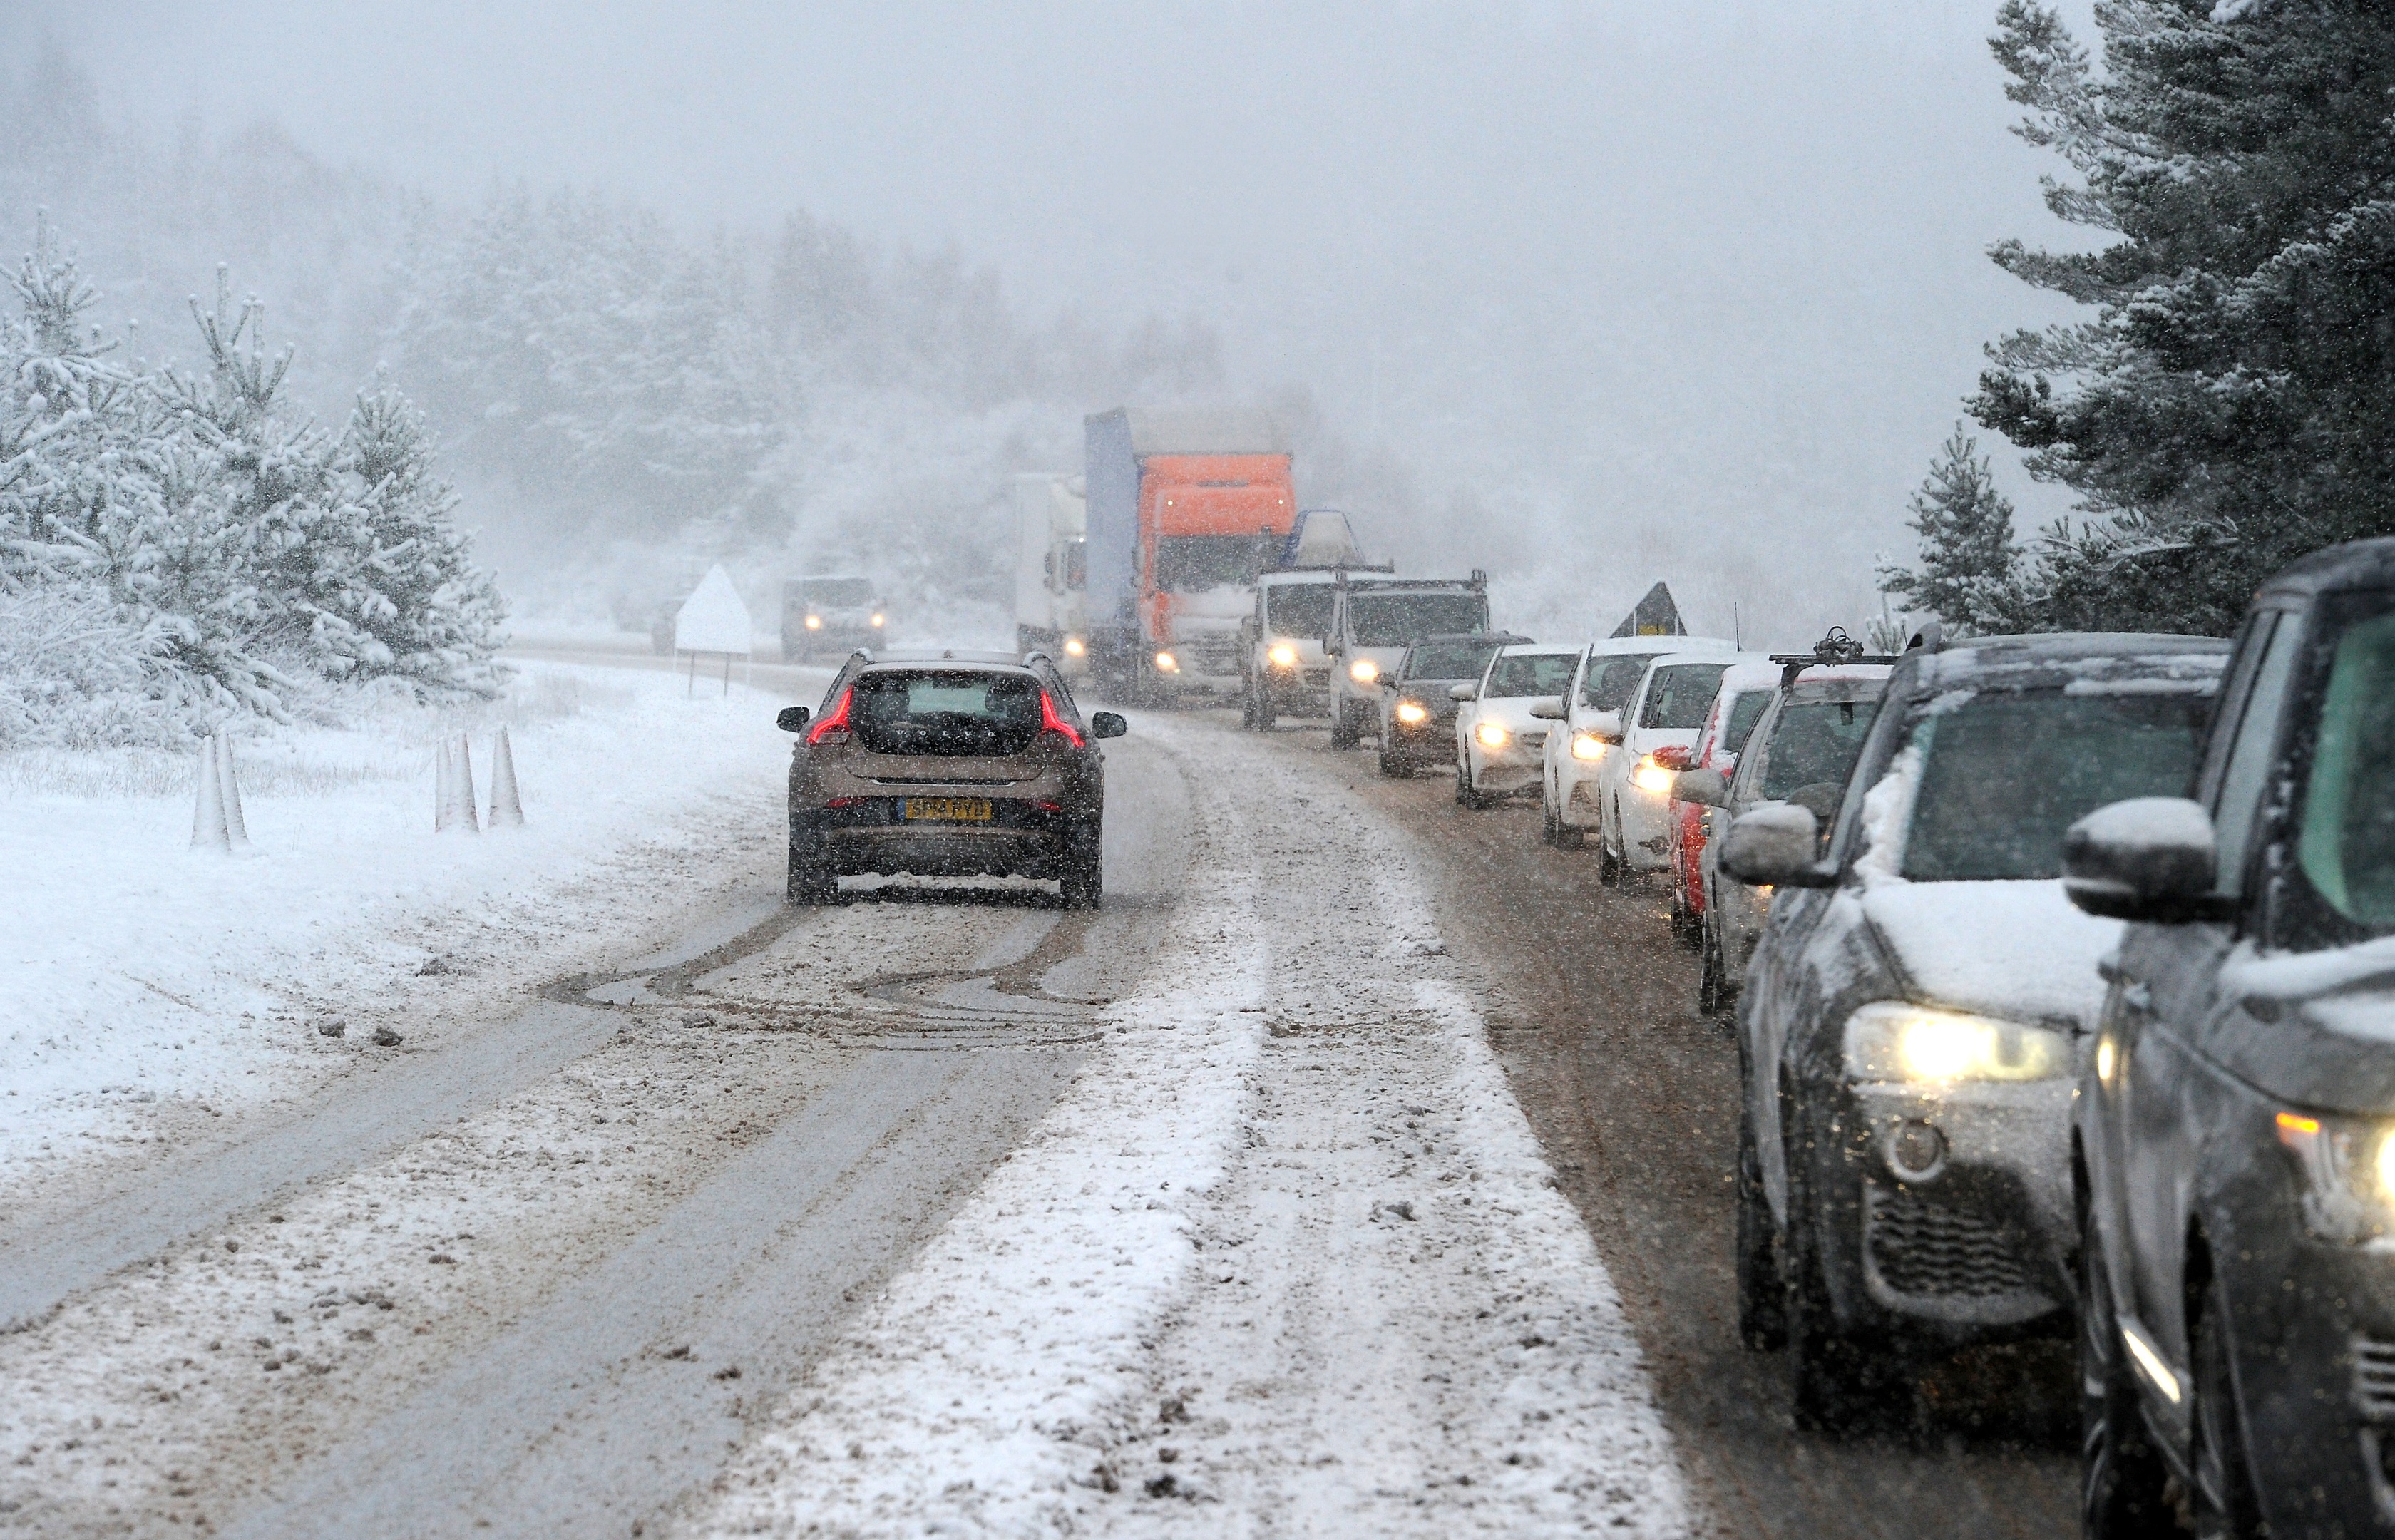 The Met Office has warned winter weather could continue into the weekend.